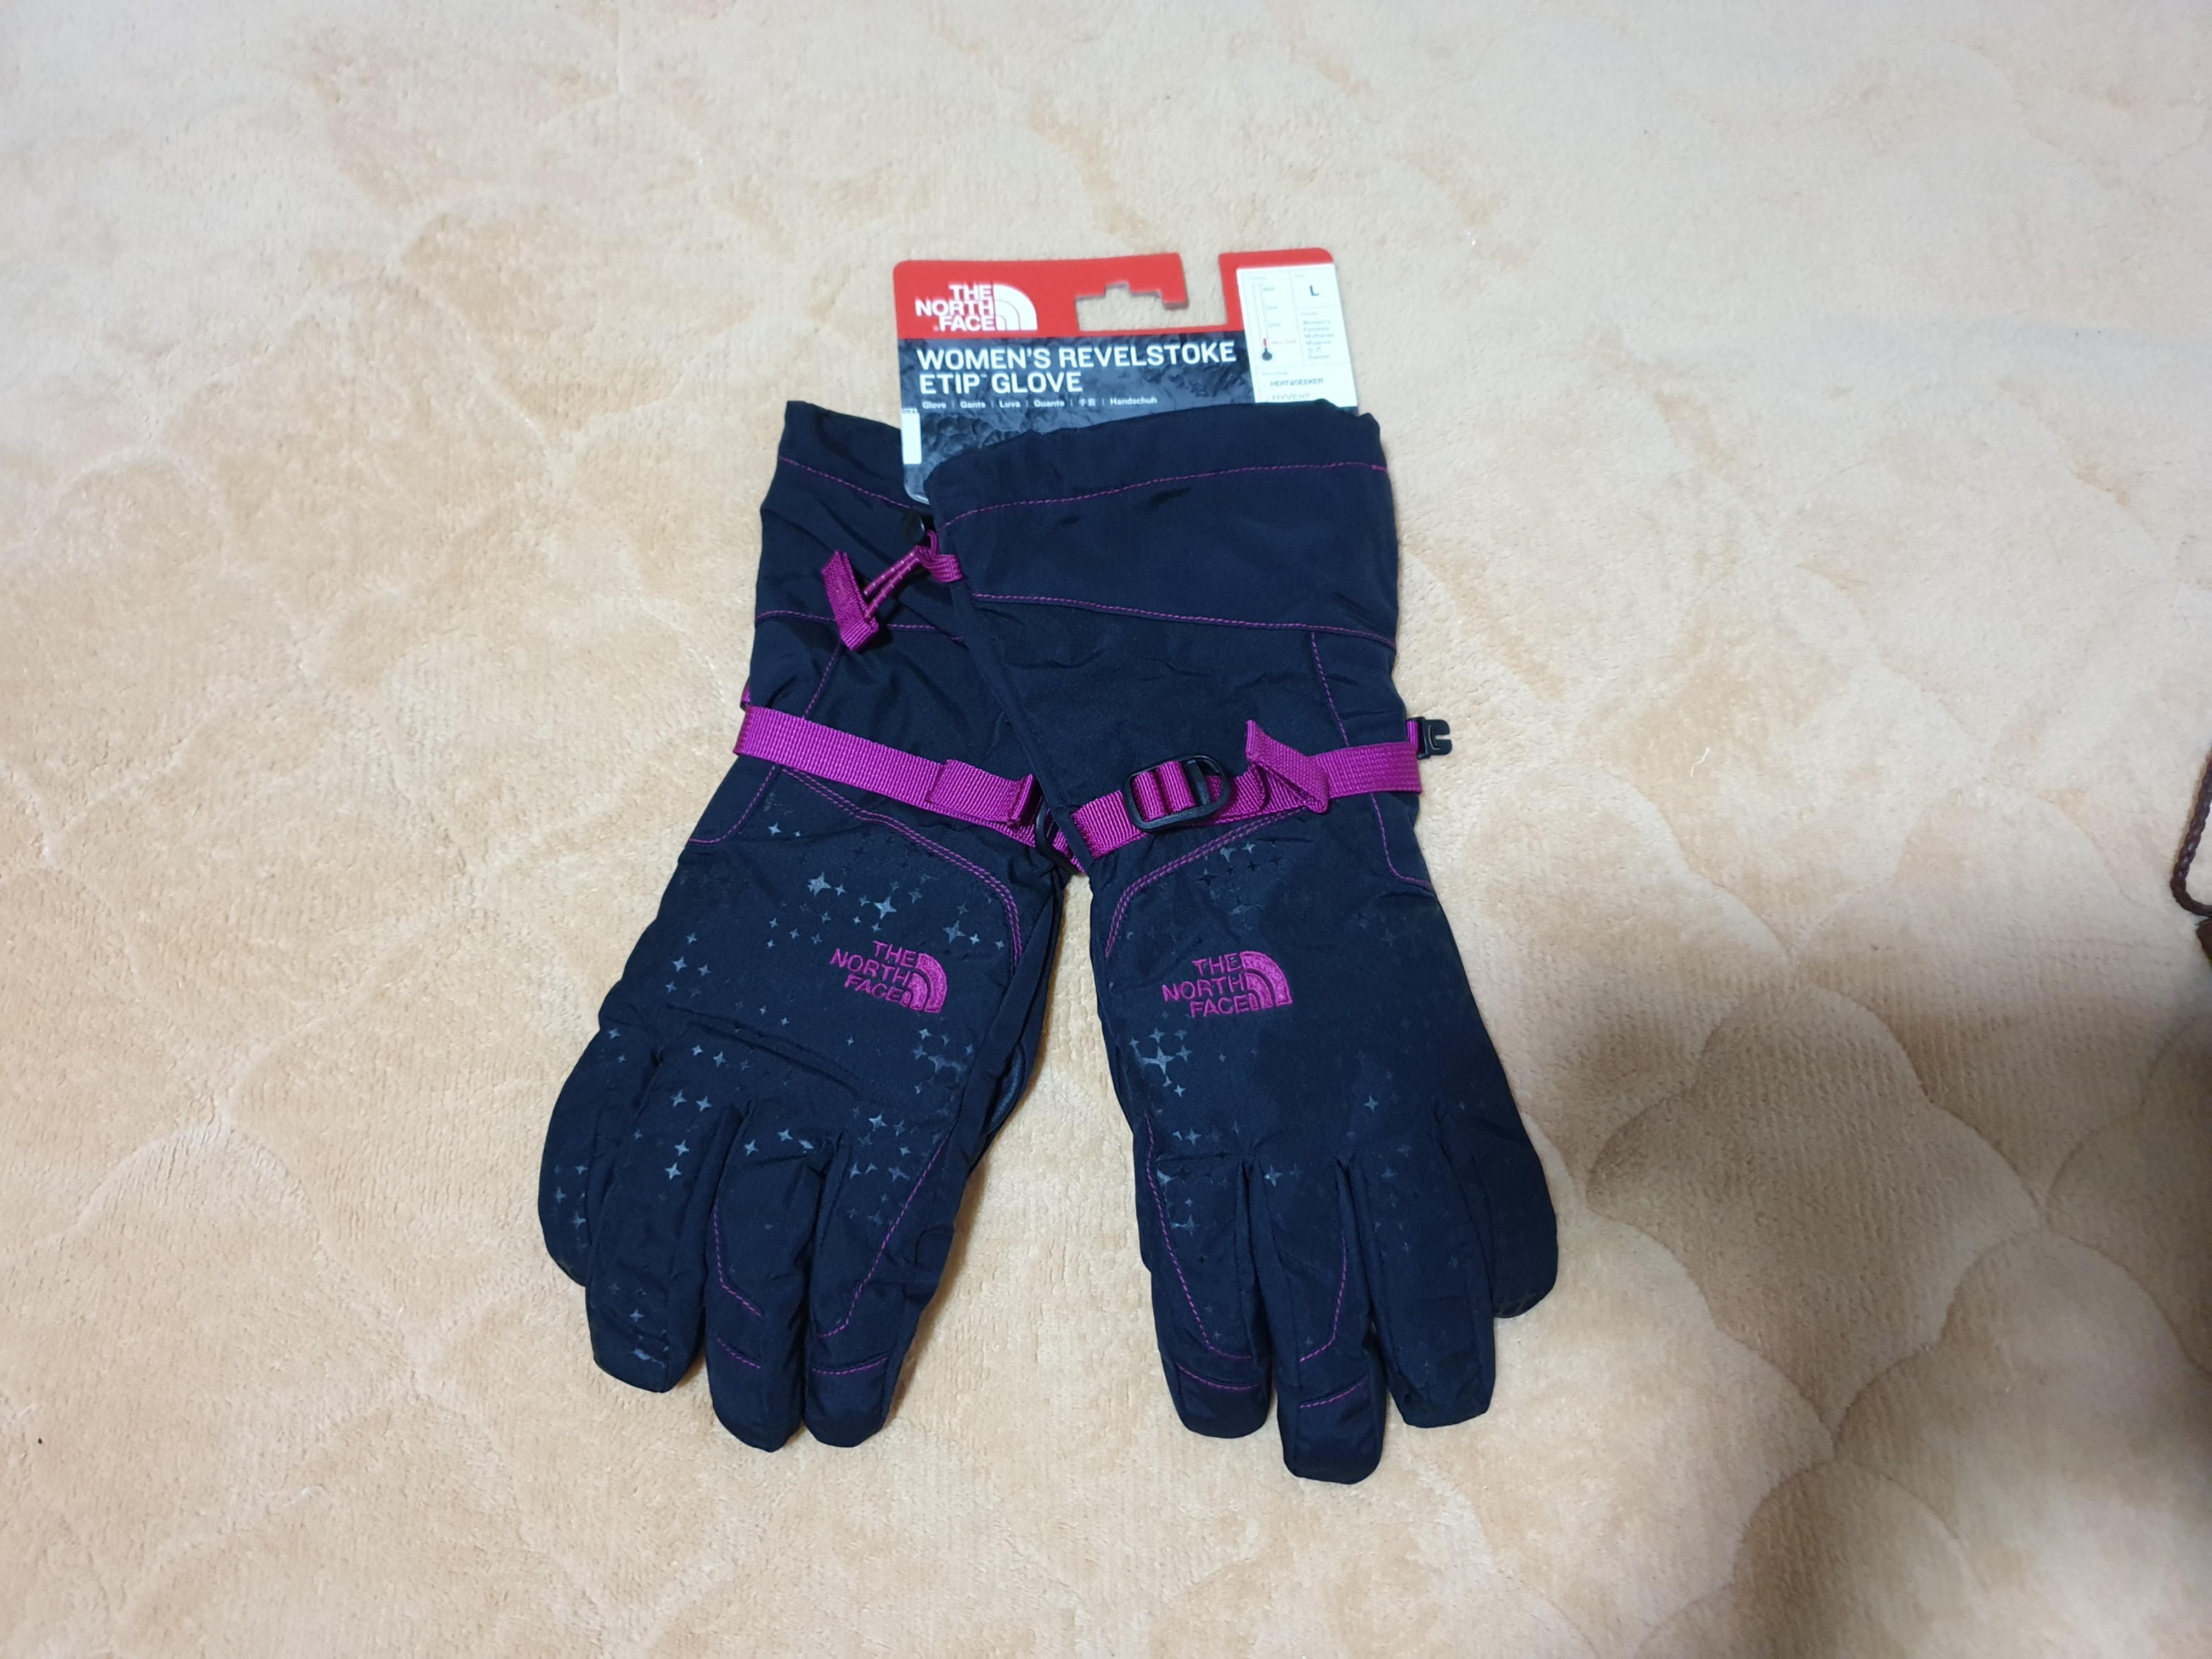 north face winter gloves womens